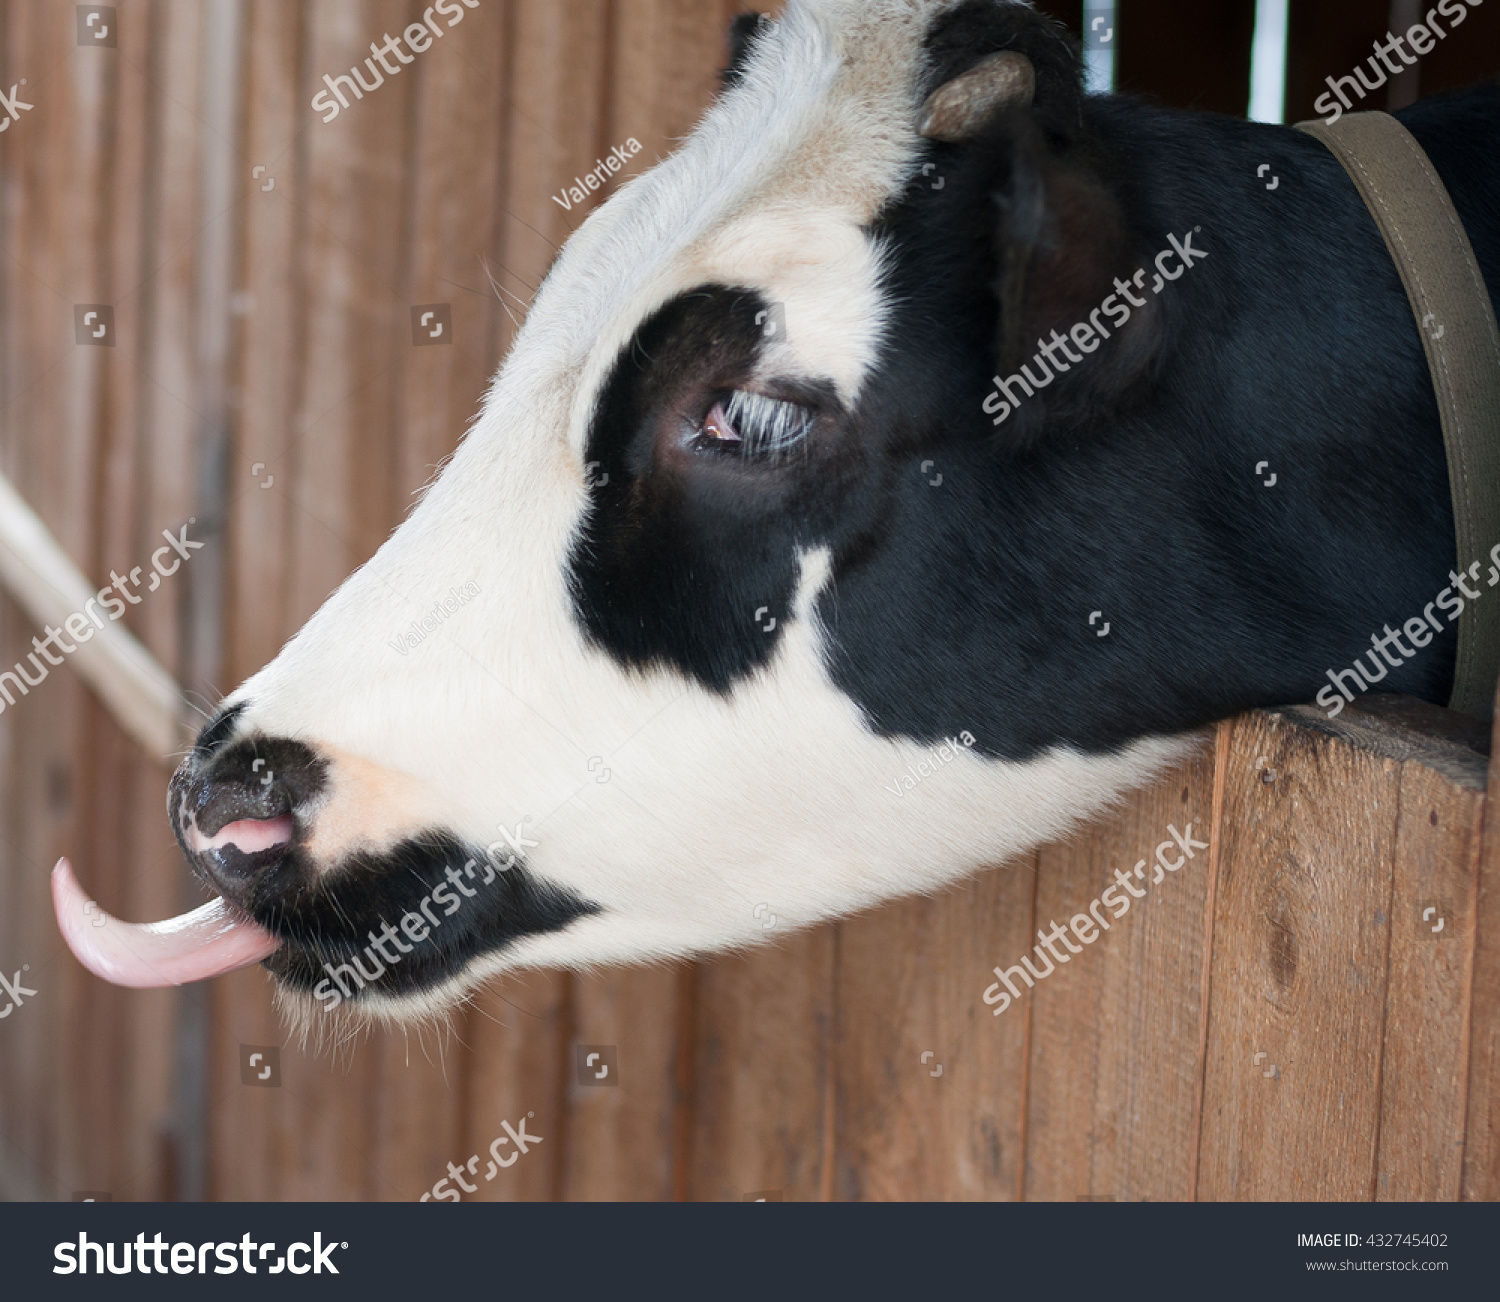 Cow Shows Tongue Stock Photo (Royalty Free) 432745402 - Shutterstock